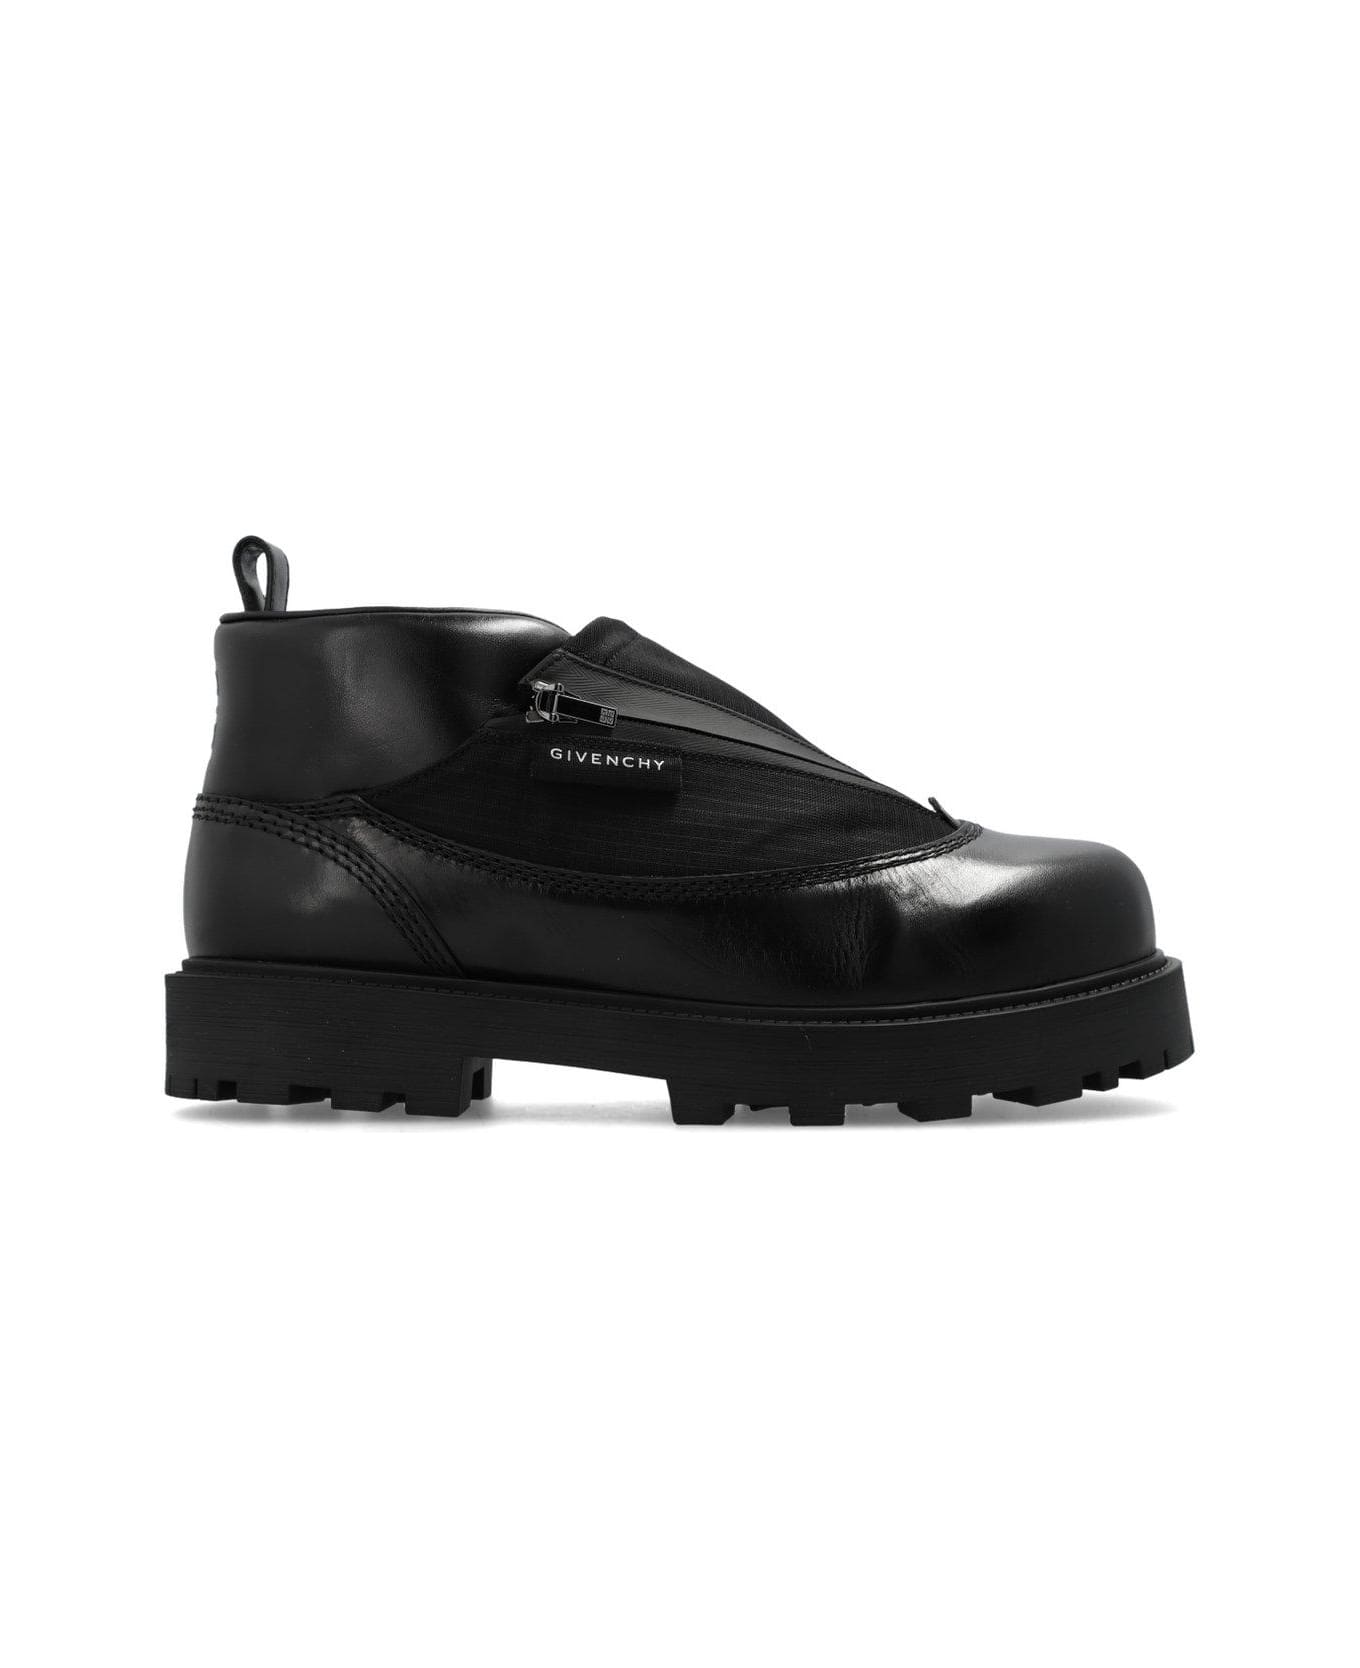 Givenchy Storm Ankle Boots - Black ブーツ